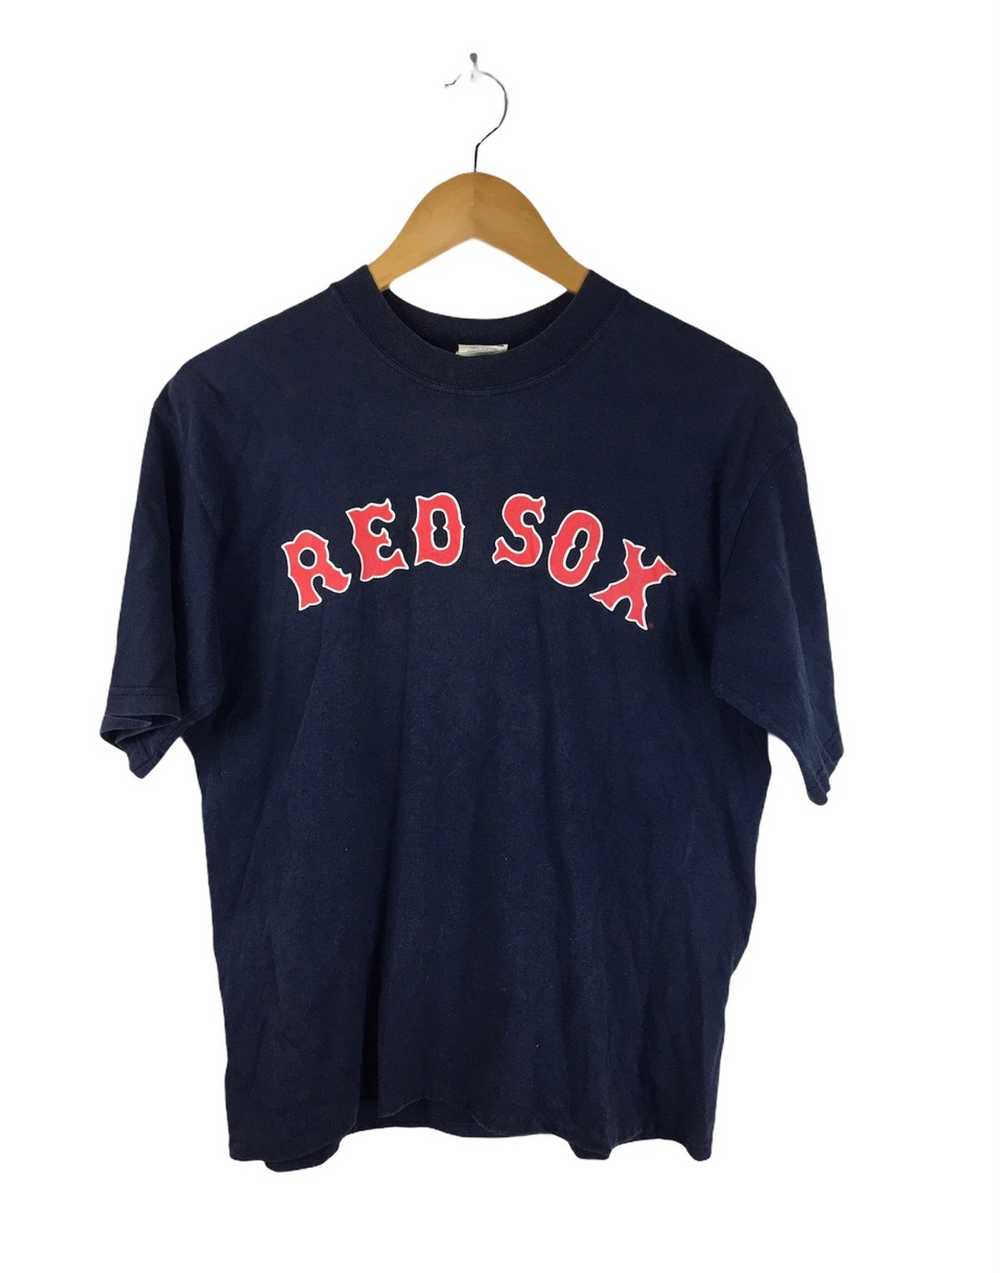 majestic red sox t shirt